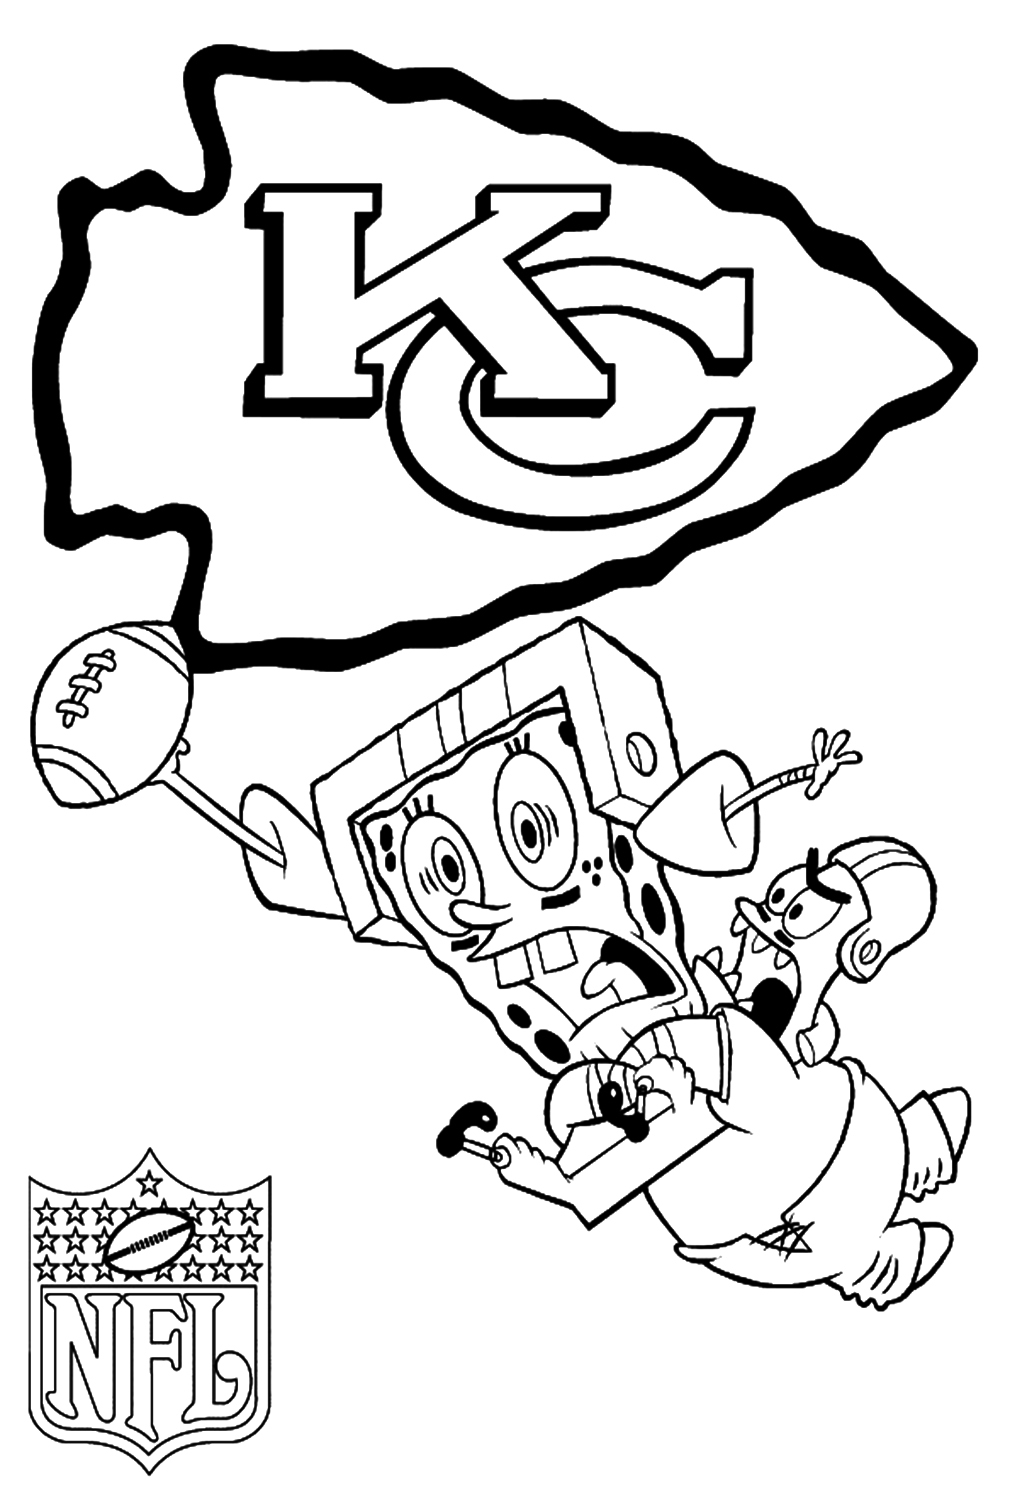 Kansas City Chiefs With Patrick and Spongebob Coloring Page